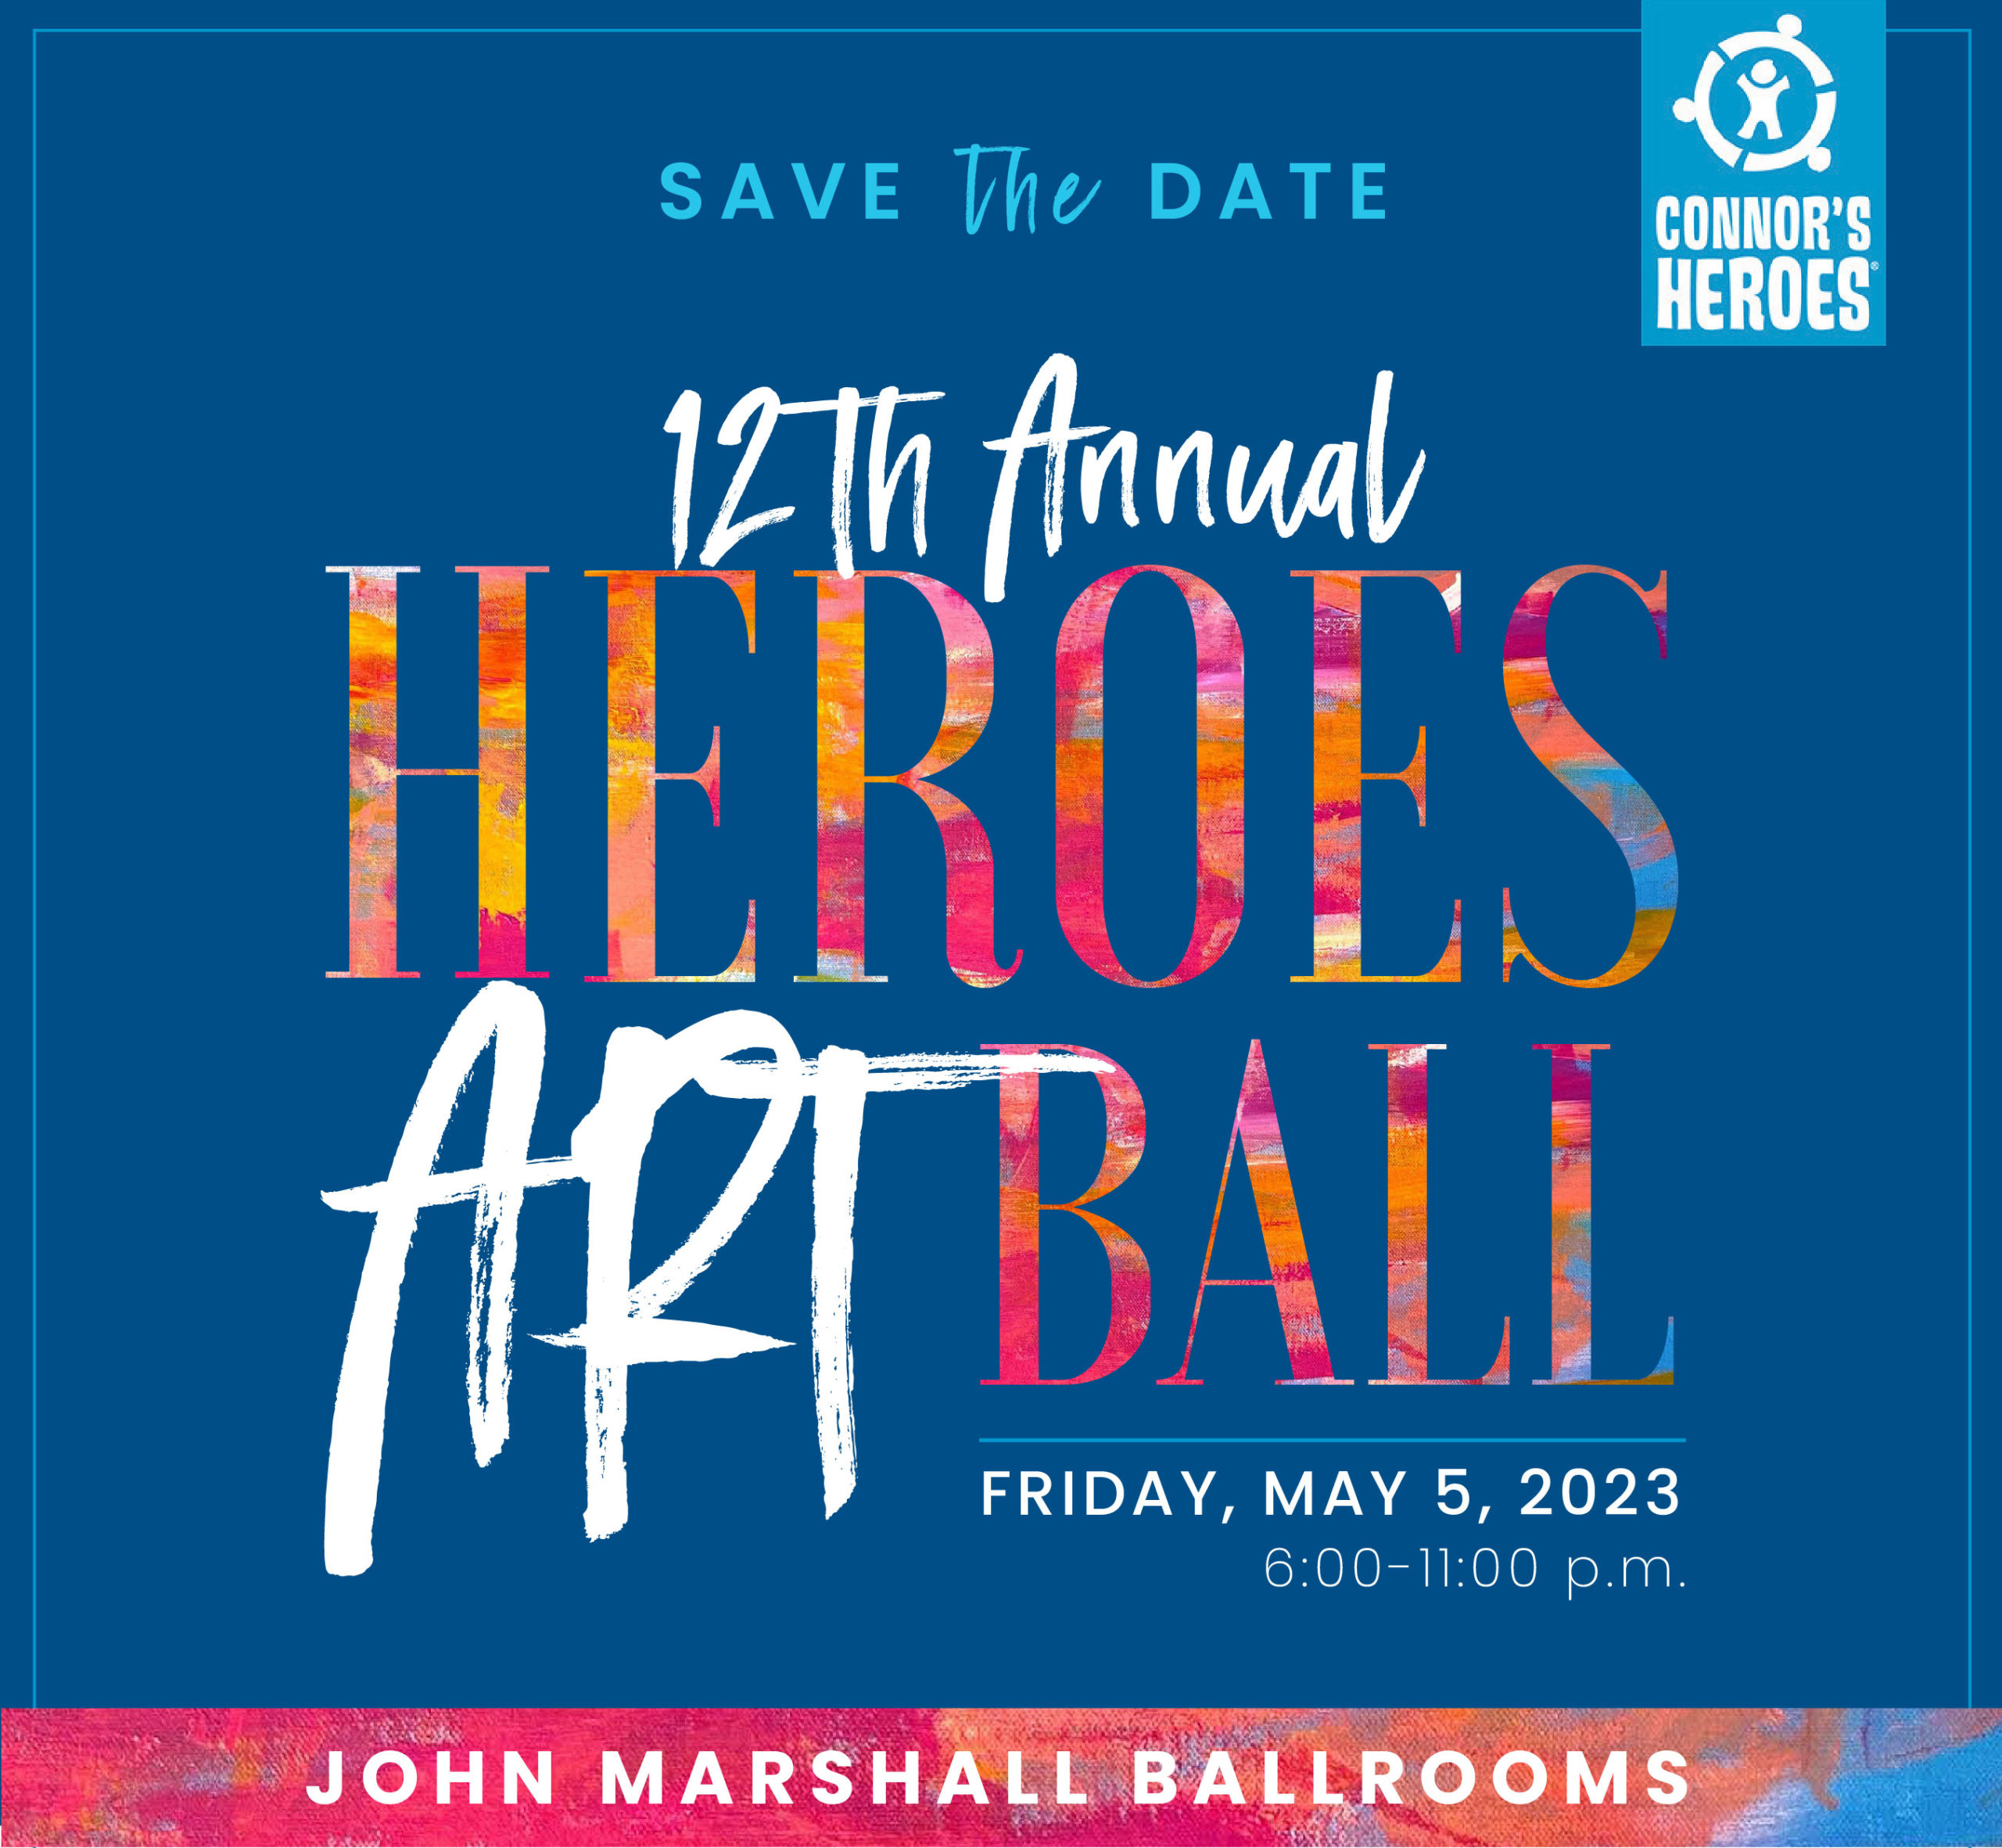 save the date 12th annual heroes art ball friday may 5 2023